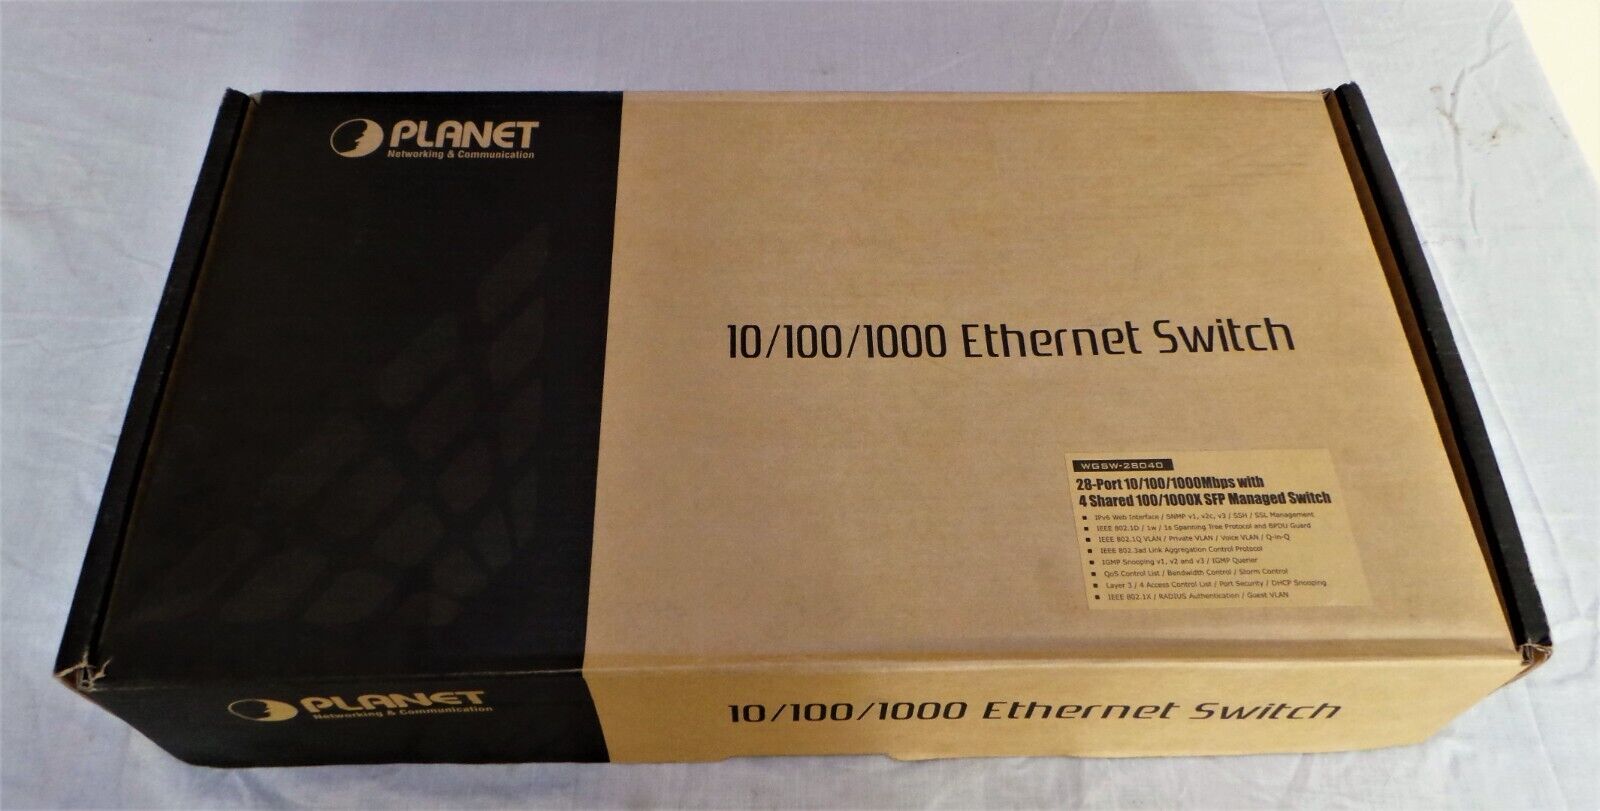 Planet networking and communication 28G managed switch.